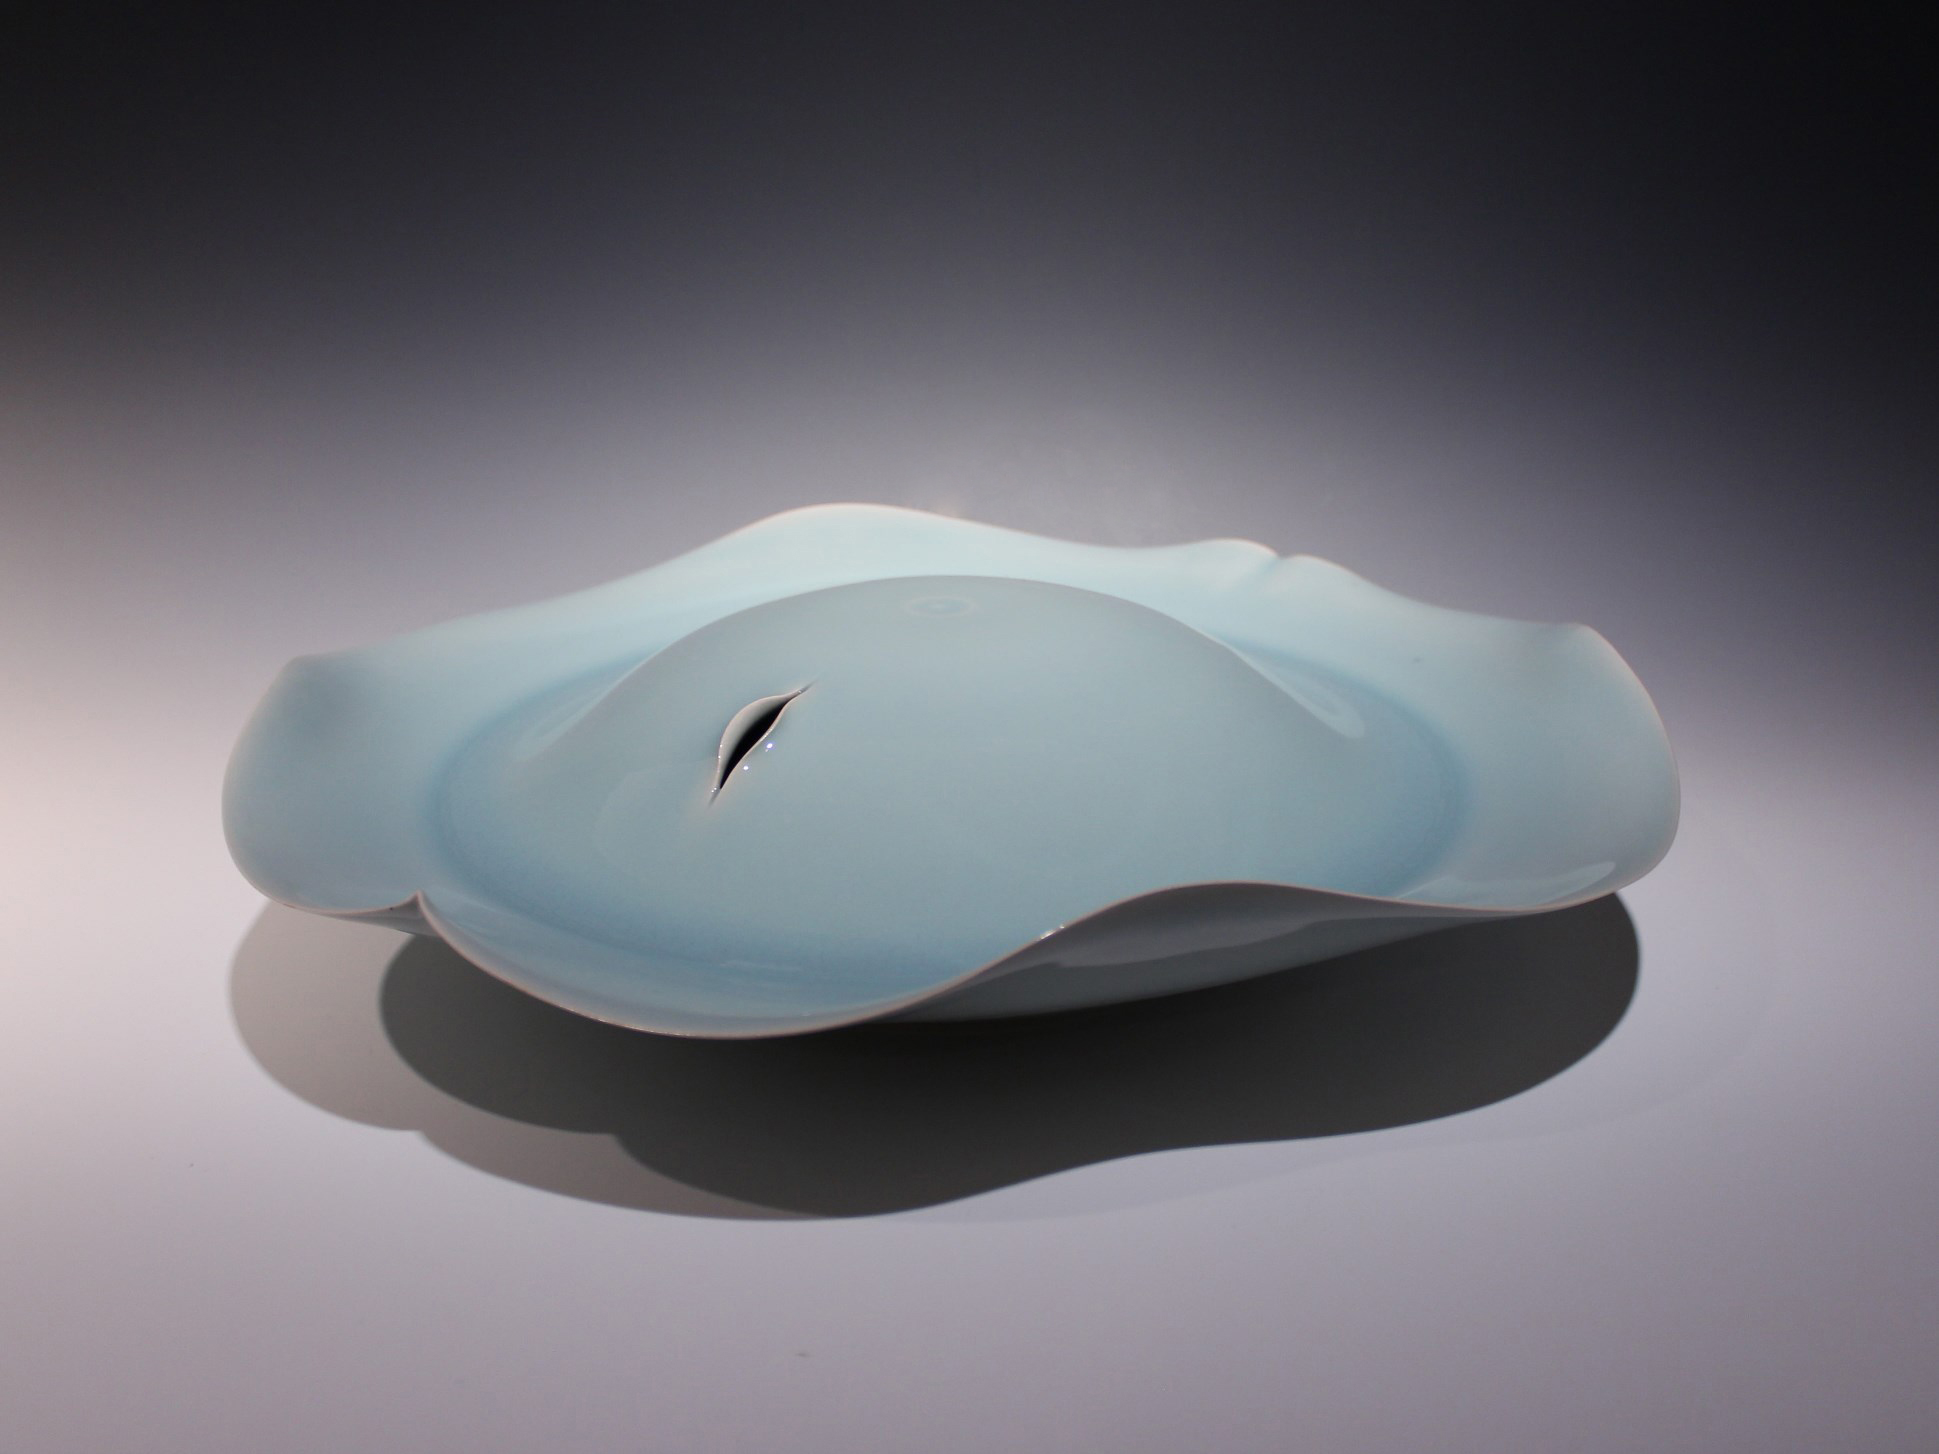 Kawase Shinobu's Jar, a flattened, light blue porcelain jar, with flowing edges and a small slit for an opening